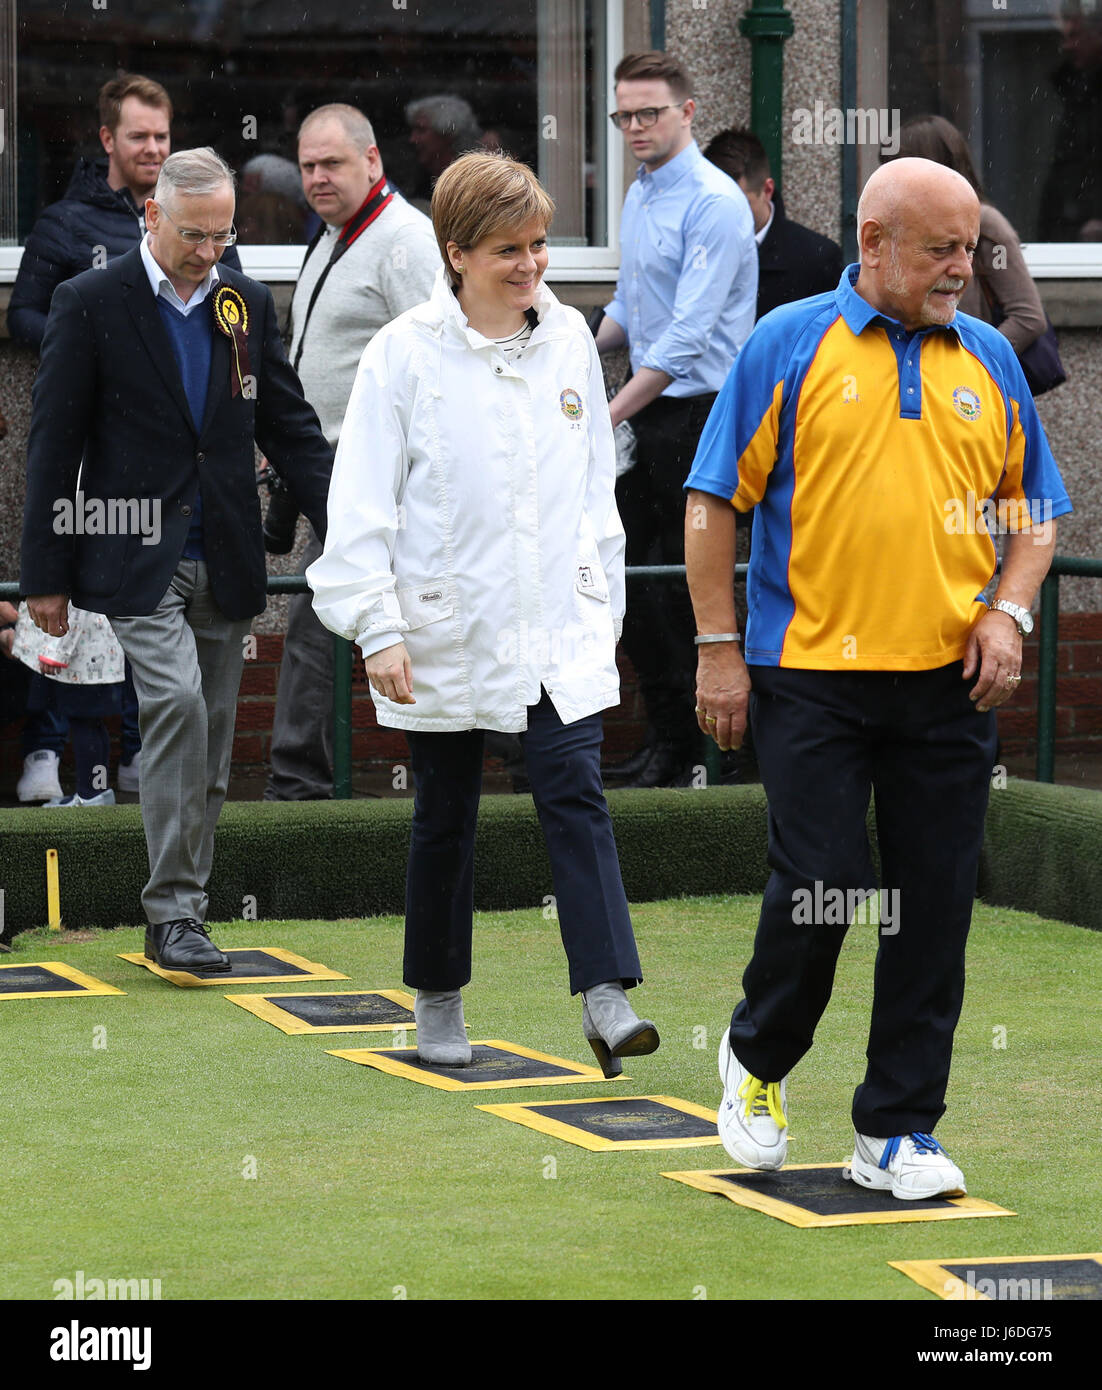 First Minister and SNP leader Nicola Sturgeon walks on the green to throw a bowl during a visit to the Liberton Bowling Club in Edinburgh South as part of the party's General Election campaign trail. Stock Photo